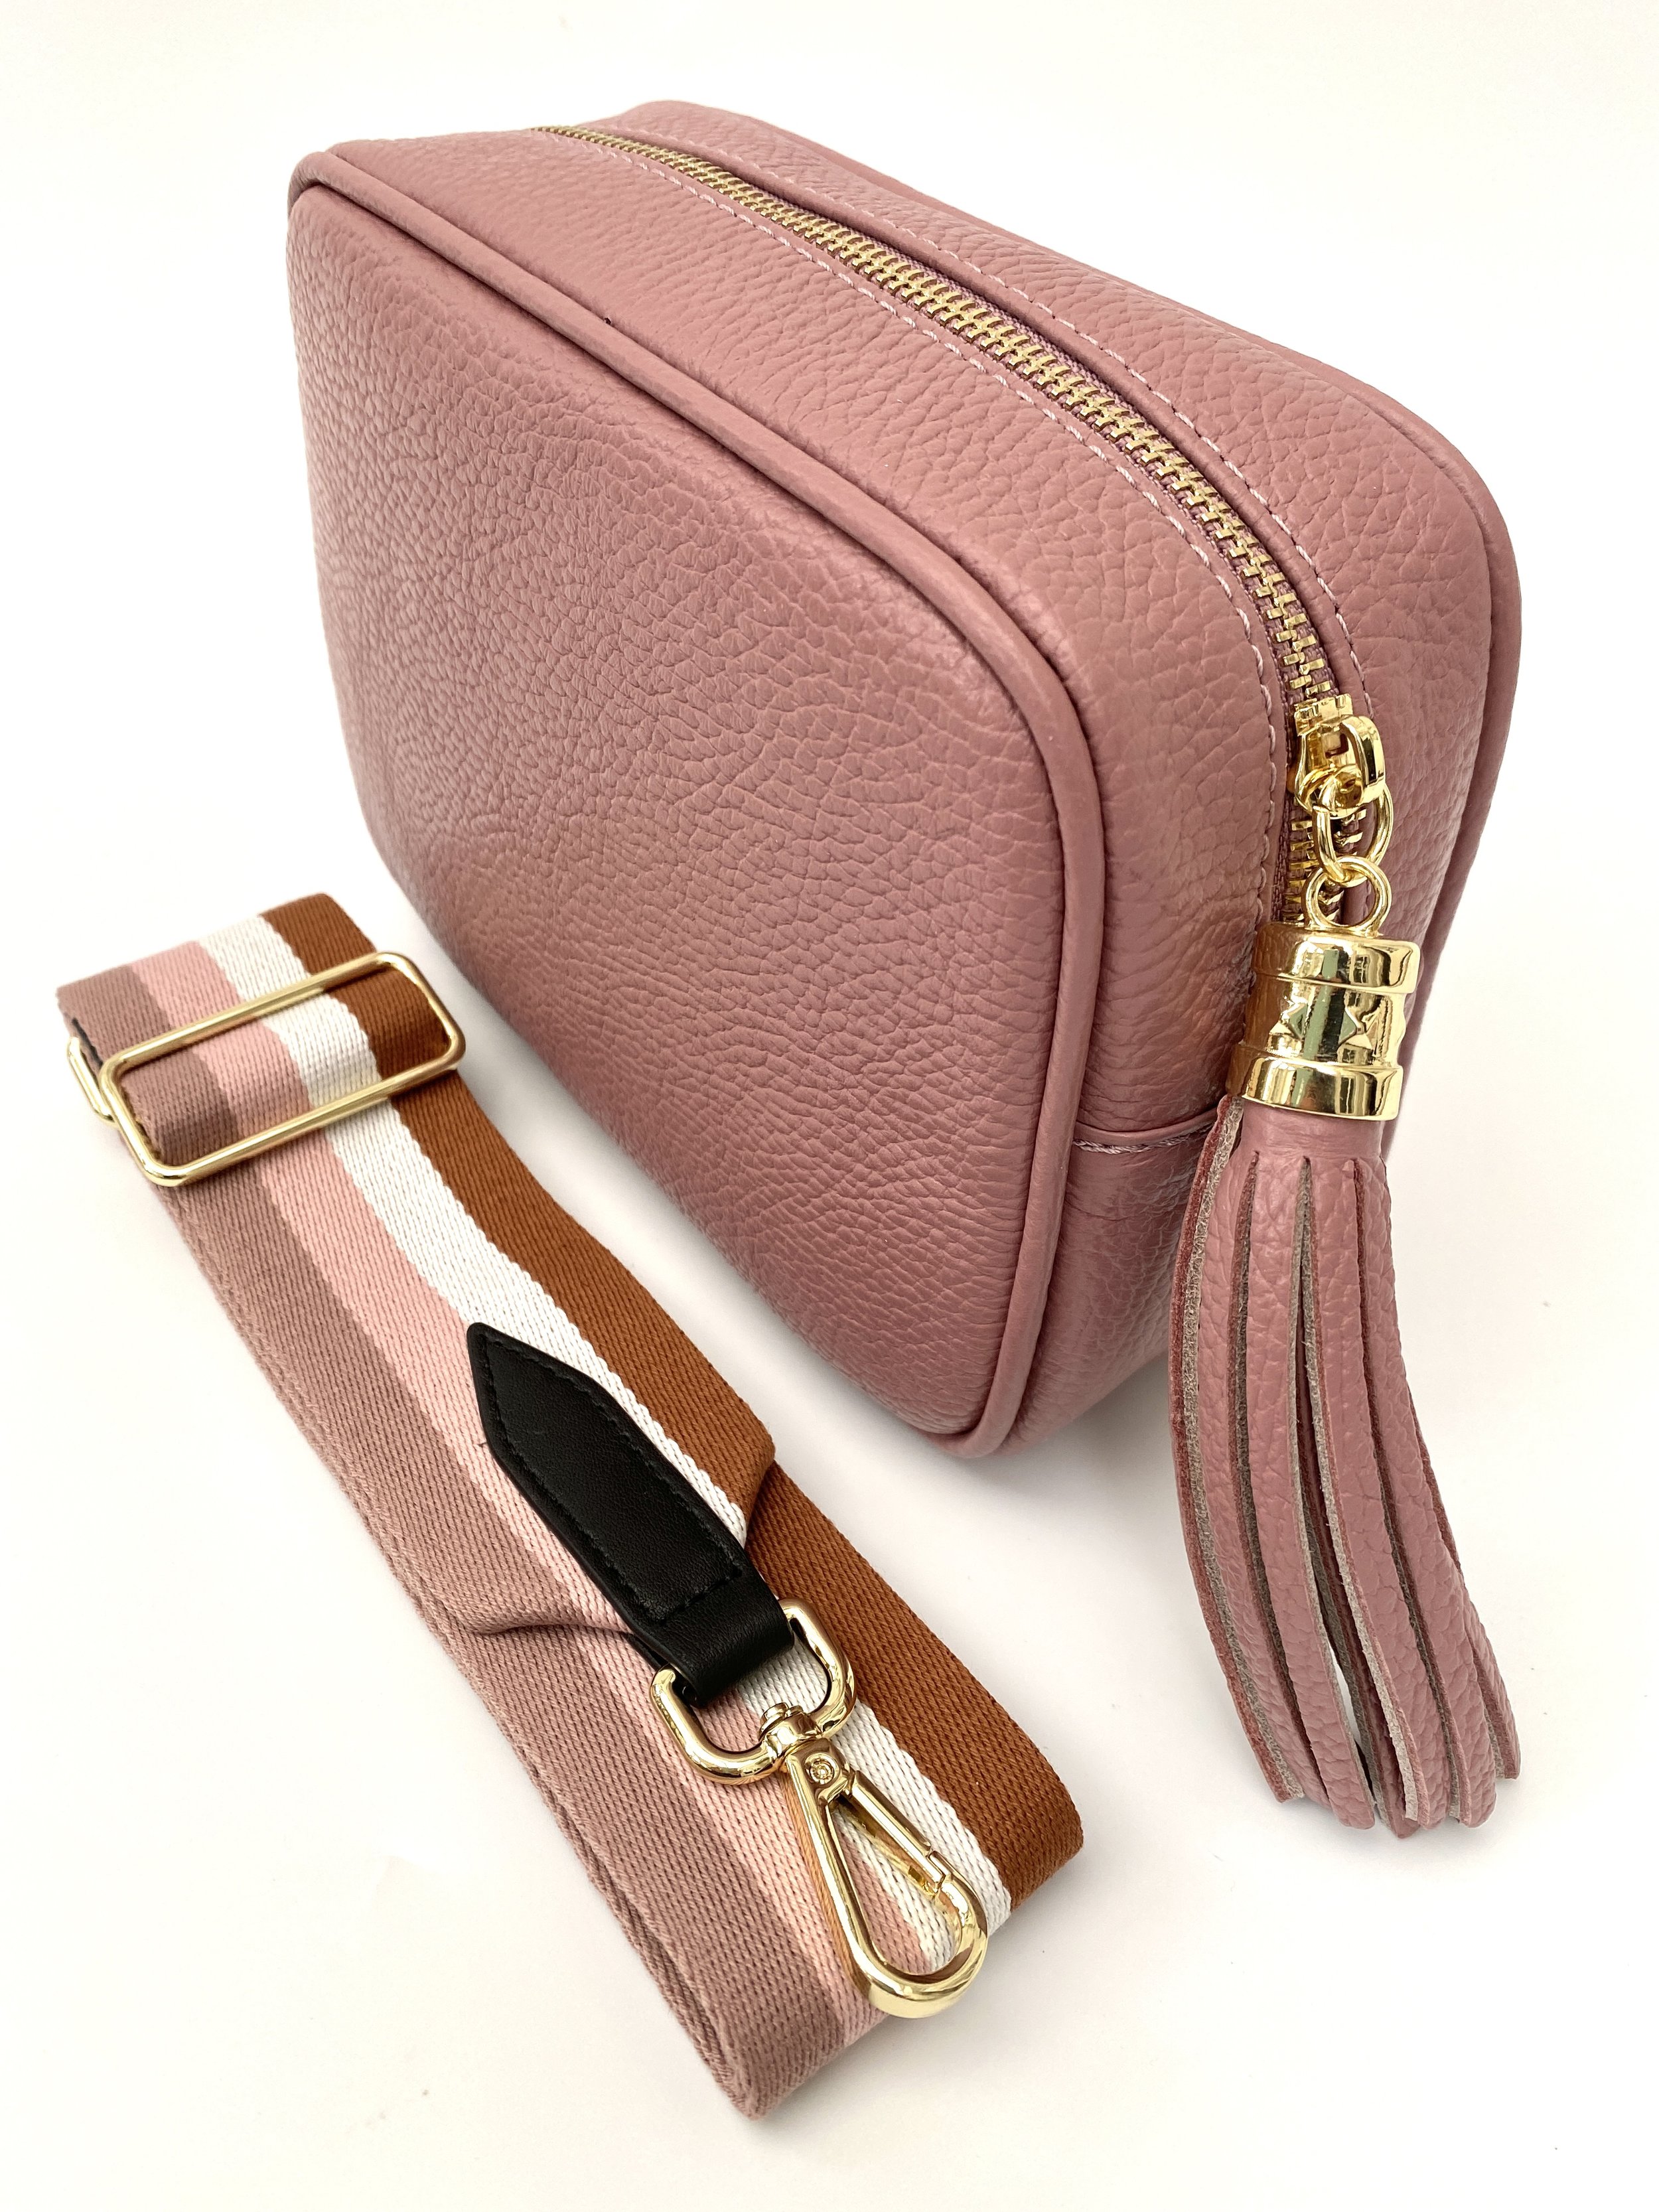 Bags & Purses Pouches & Coin Purses Gold Hardware Black Tassle Crossbody Bag with Changeable Strap 